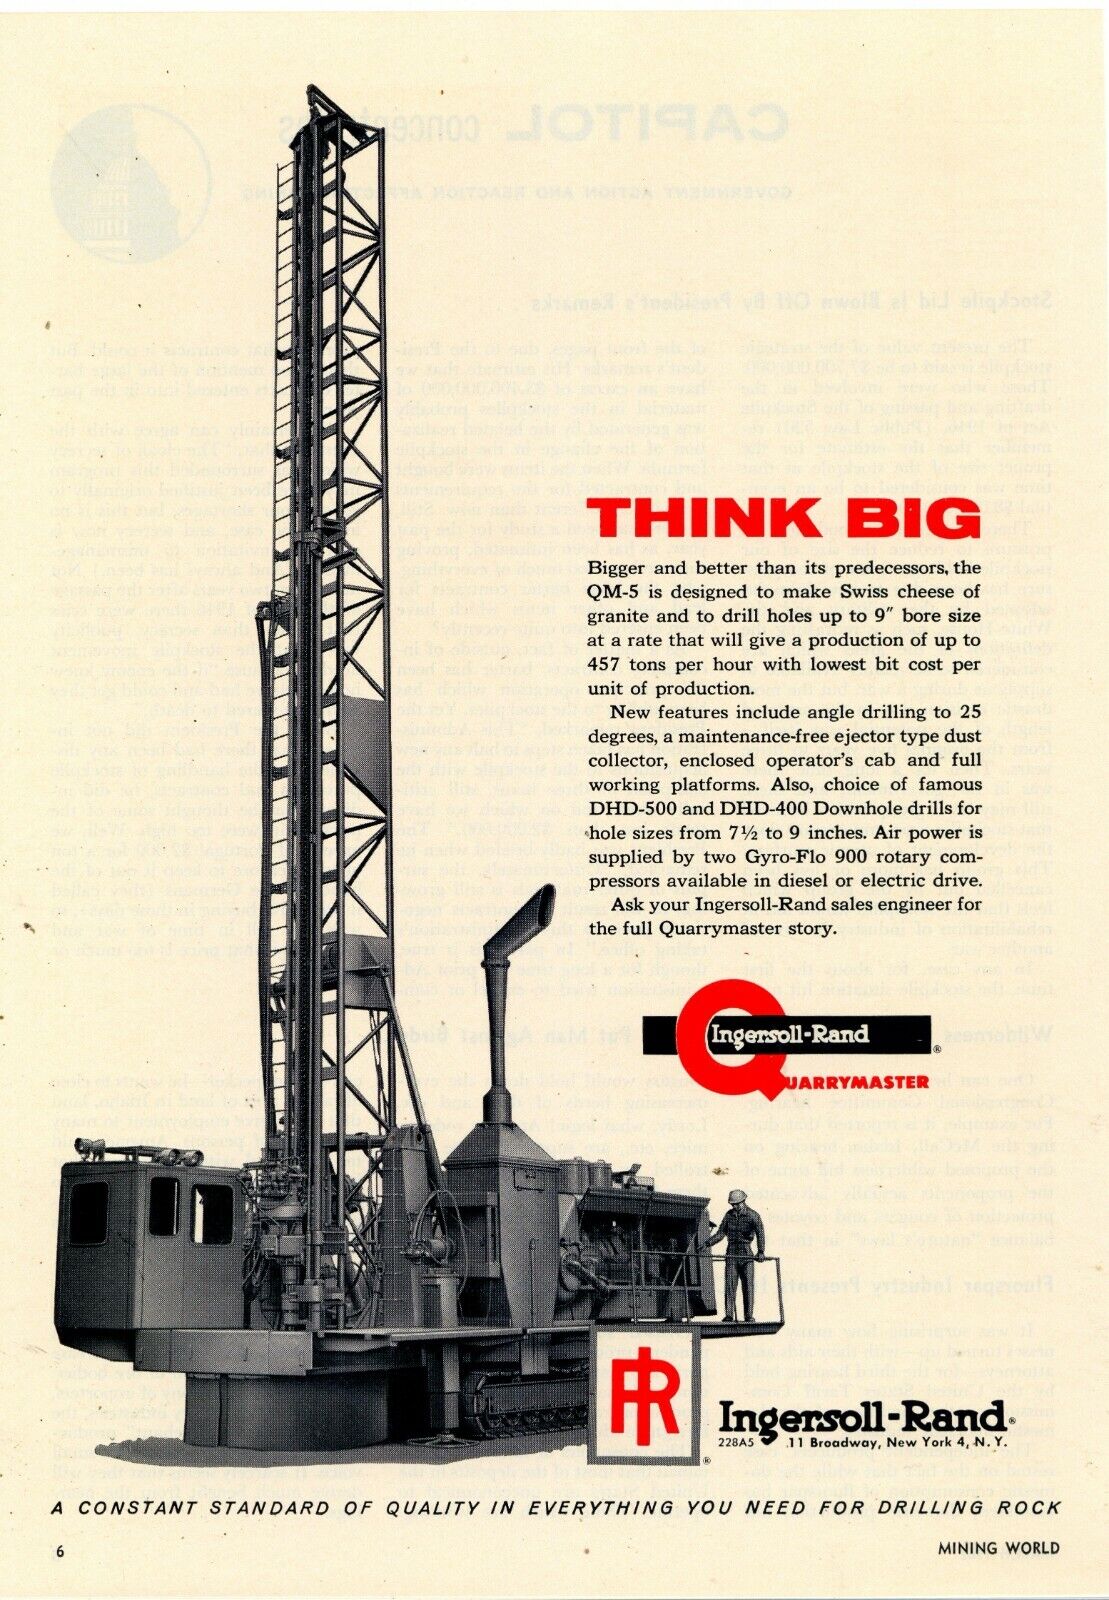 1962 Ingersoll Rand Ad: QM-5 Quarrymaster Rock Driller - Rock to Swiss Cheese